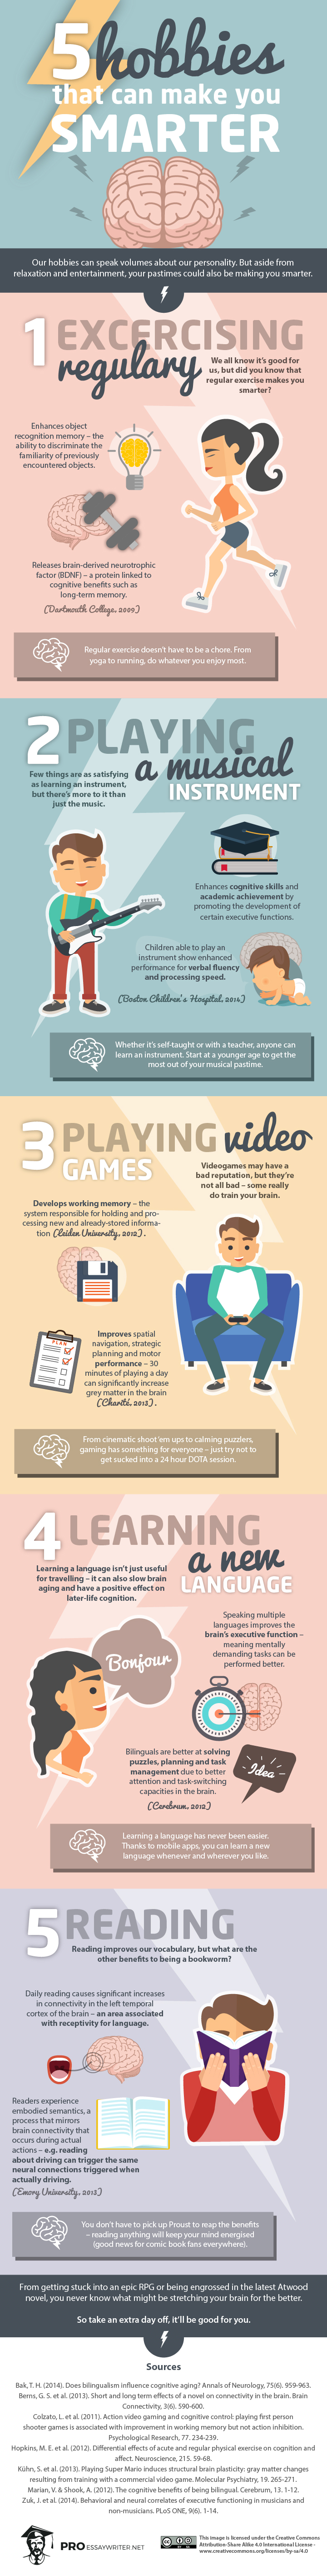 5 Hobbies That Can Make You Smarter